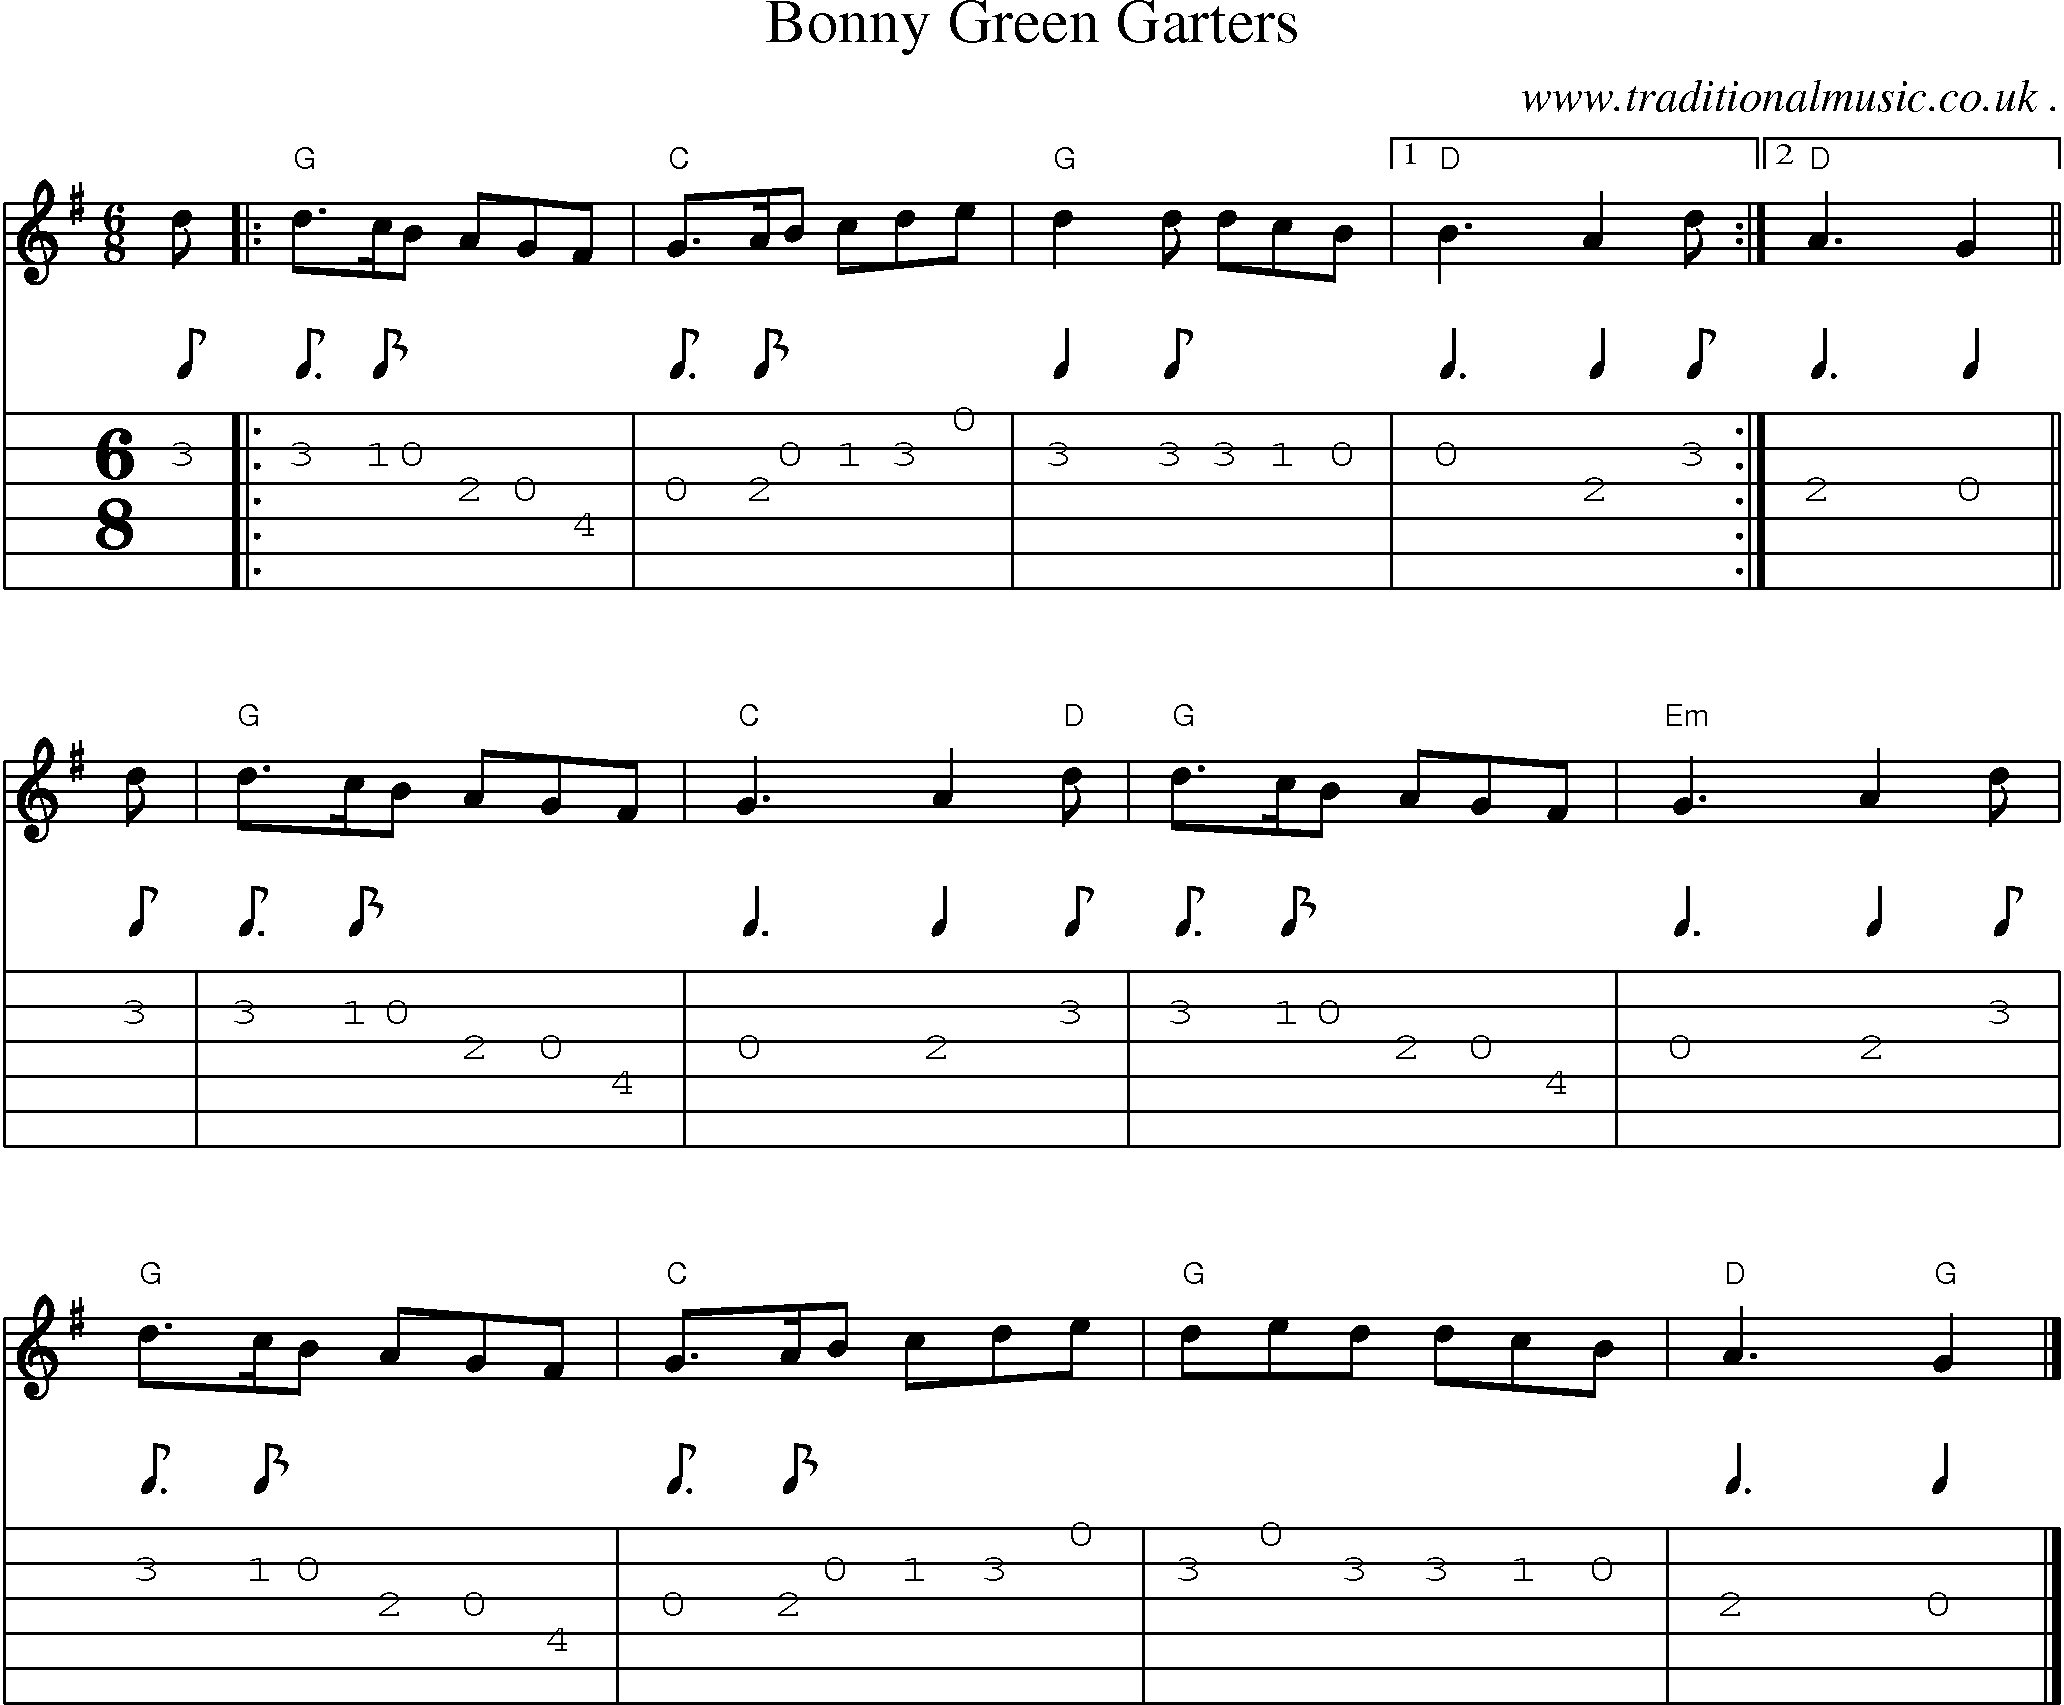 Music Score and Guitar Tabs for Bonny Green Garters